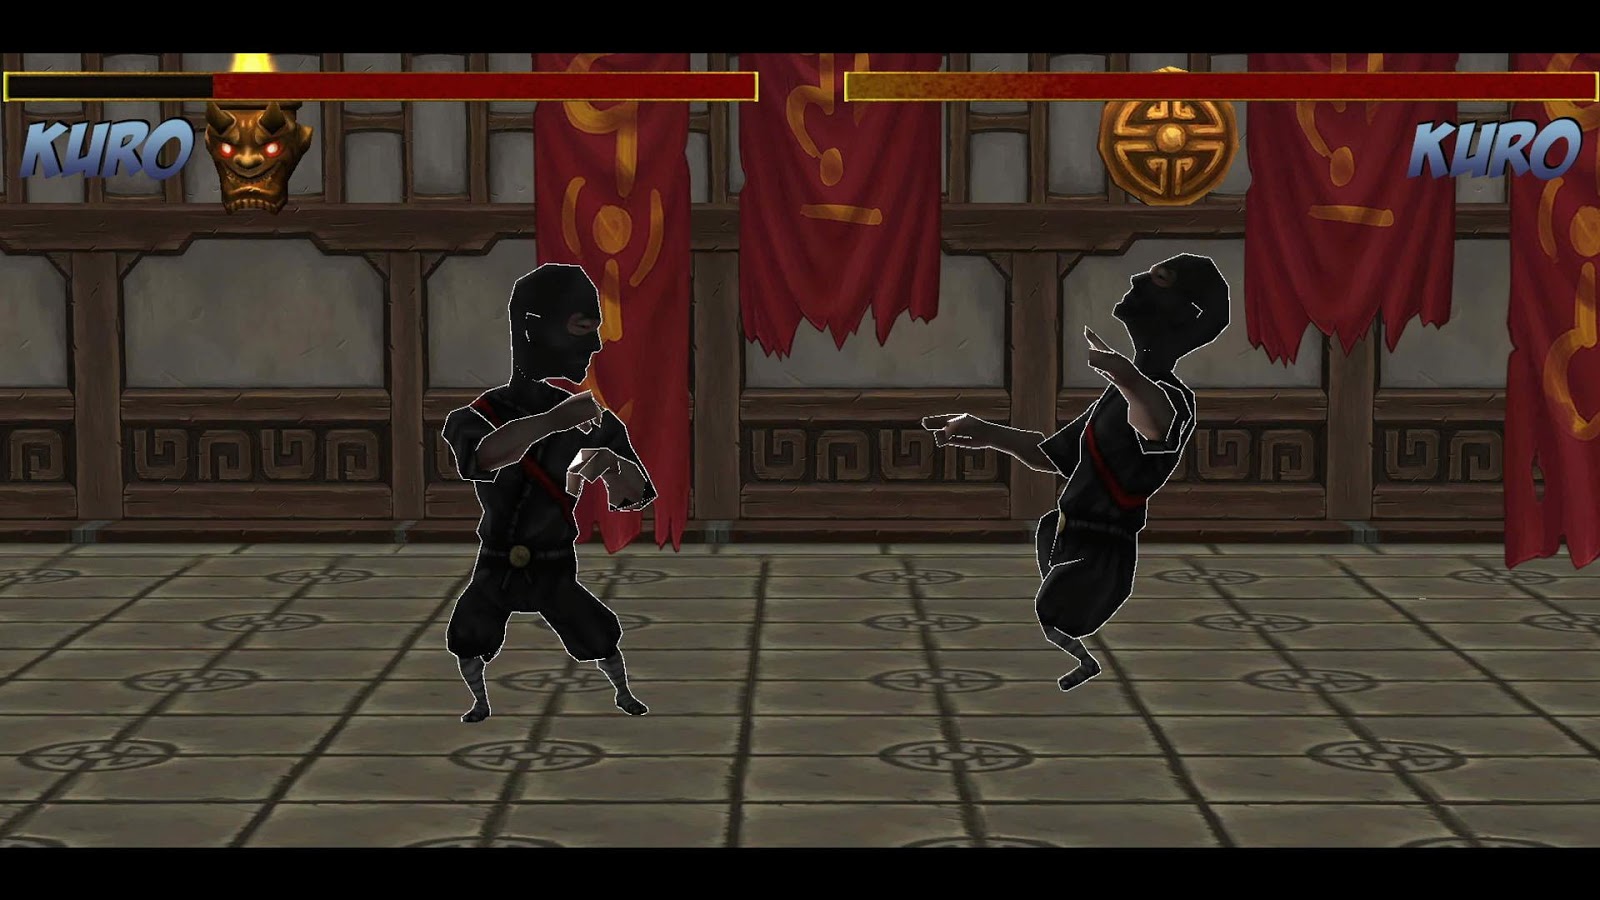 What are some good 3-D ninja games?